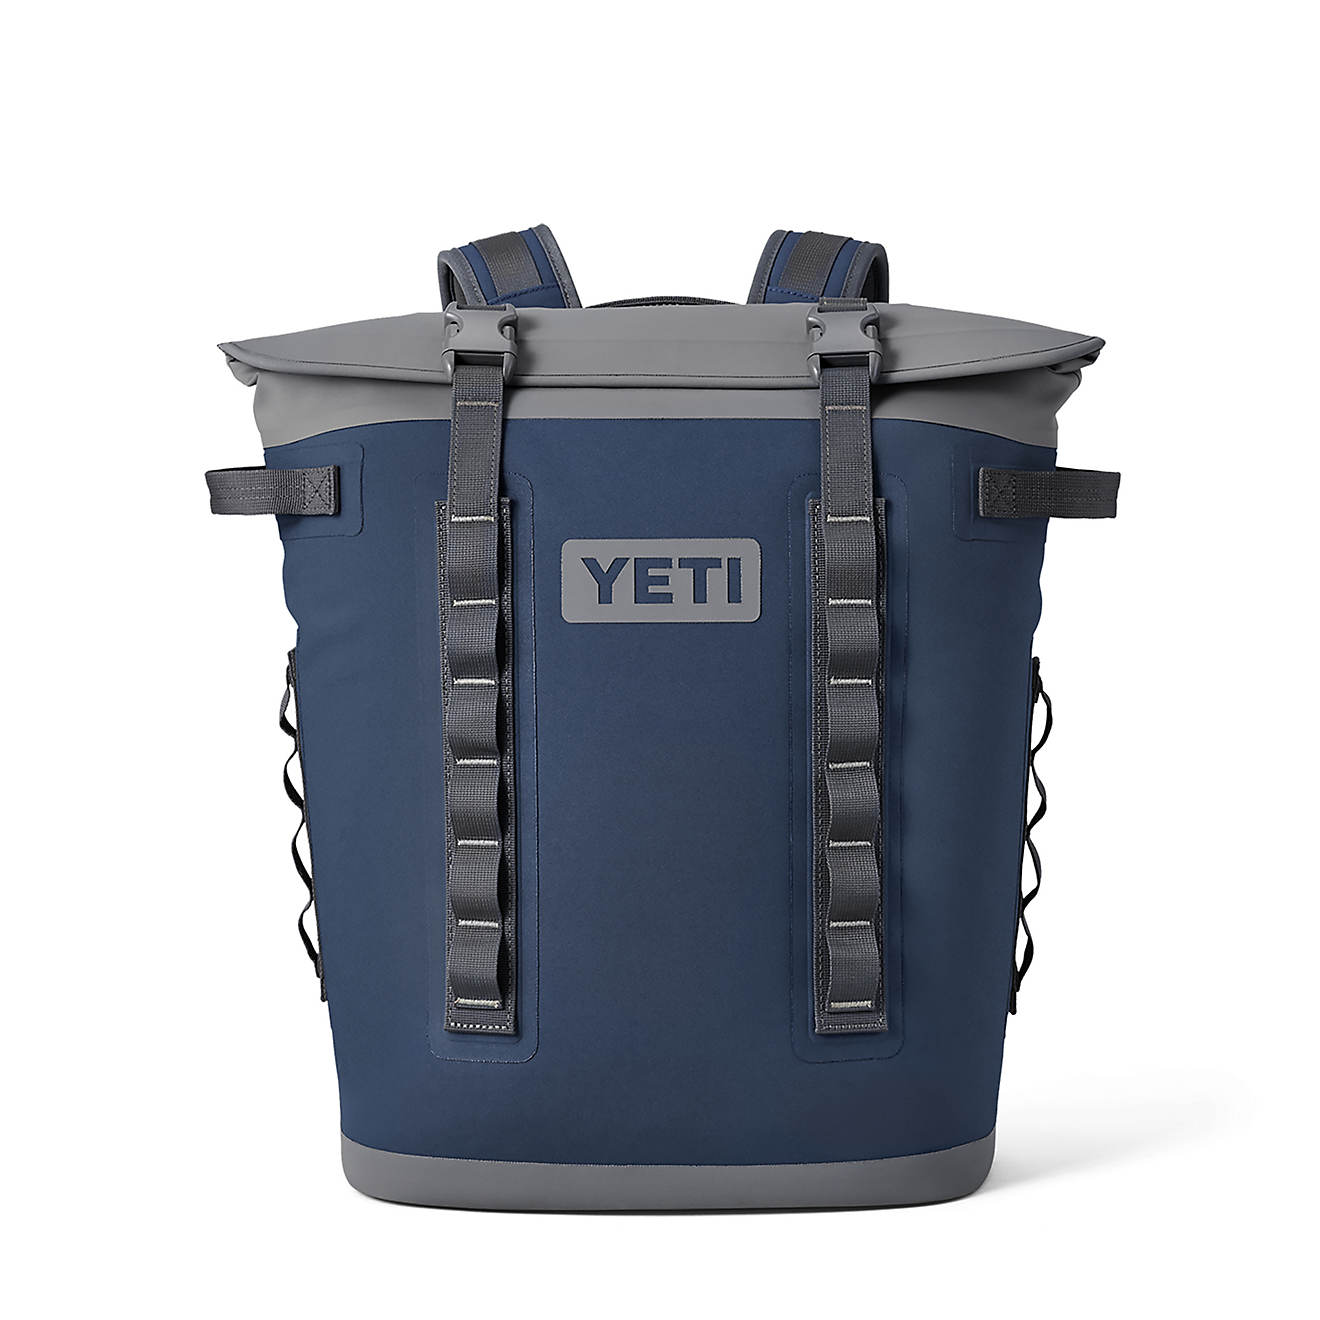 https://academy.scene7.com/is/image/academy//coolers/yeti-hopper-backpack-m20-20-soft-cooler-18050125007-blue/e5db8c25755548ae9fe43e28a441df3a?$pdp-gallery-ng$